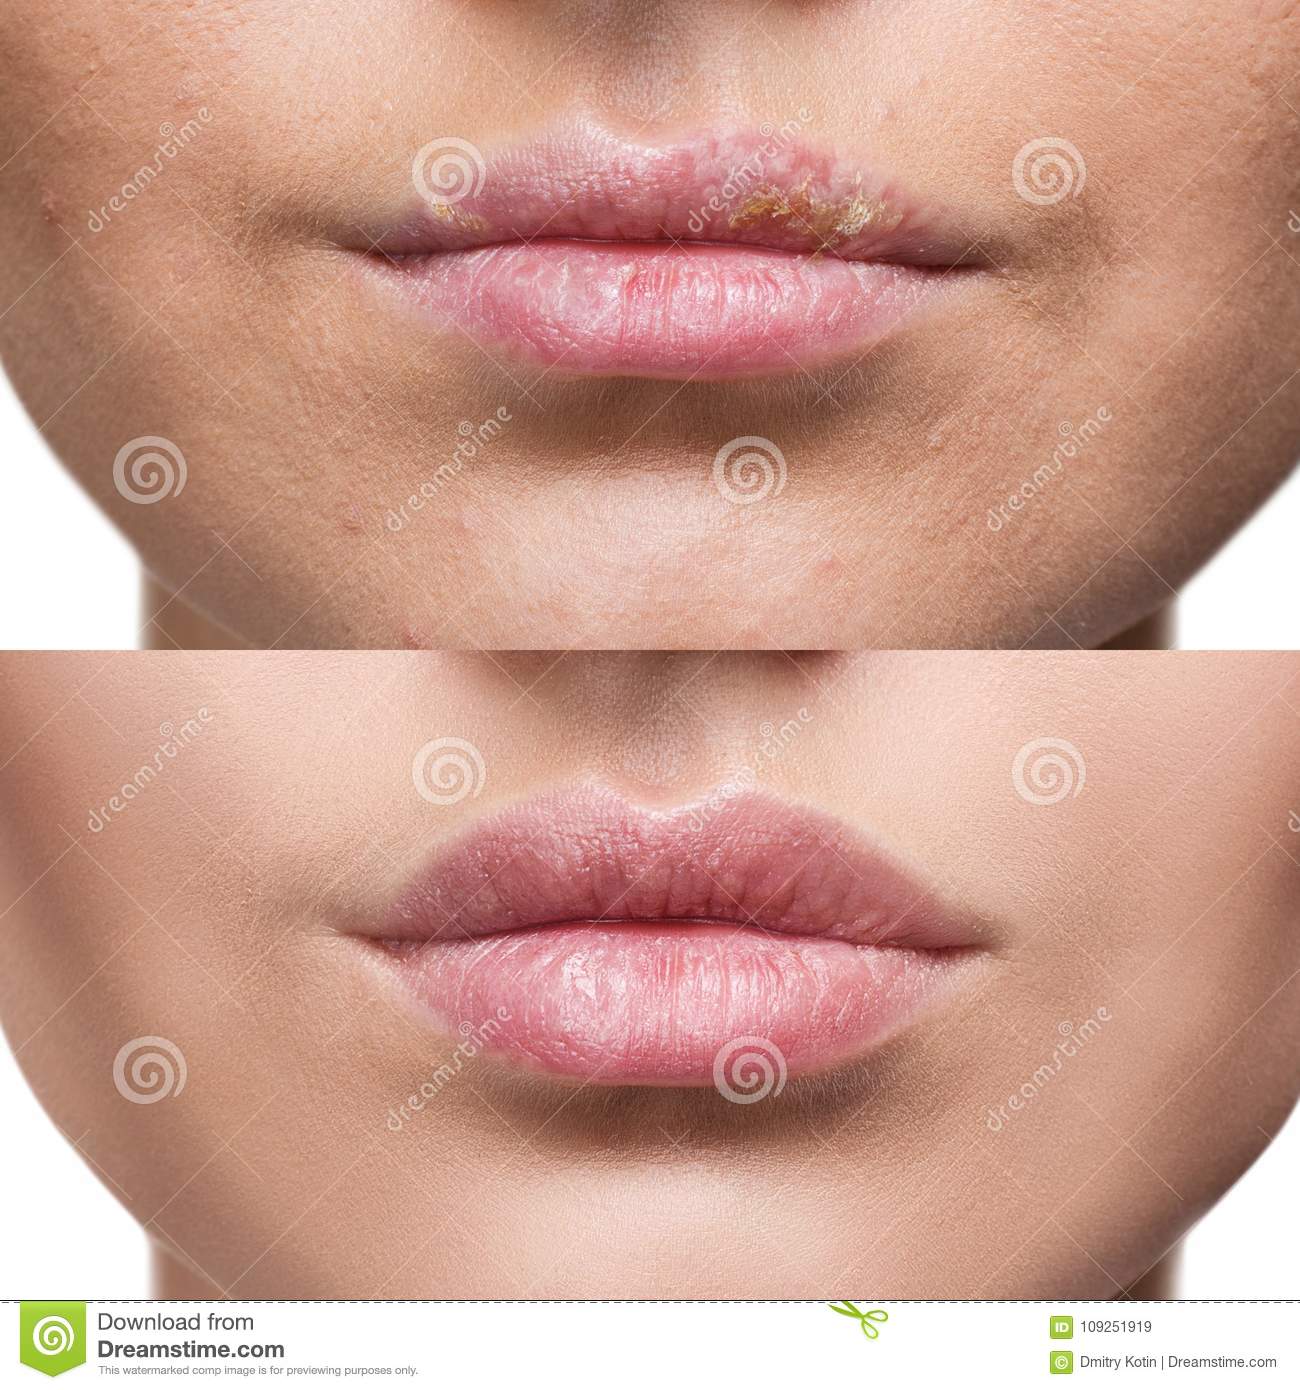 Lips with Herpes before and after Treatment. Stock Image